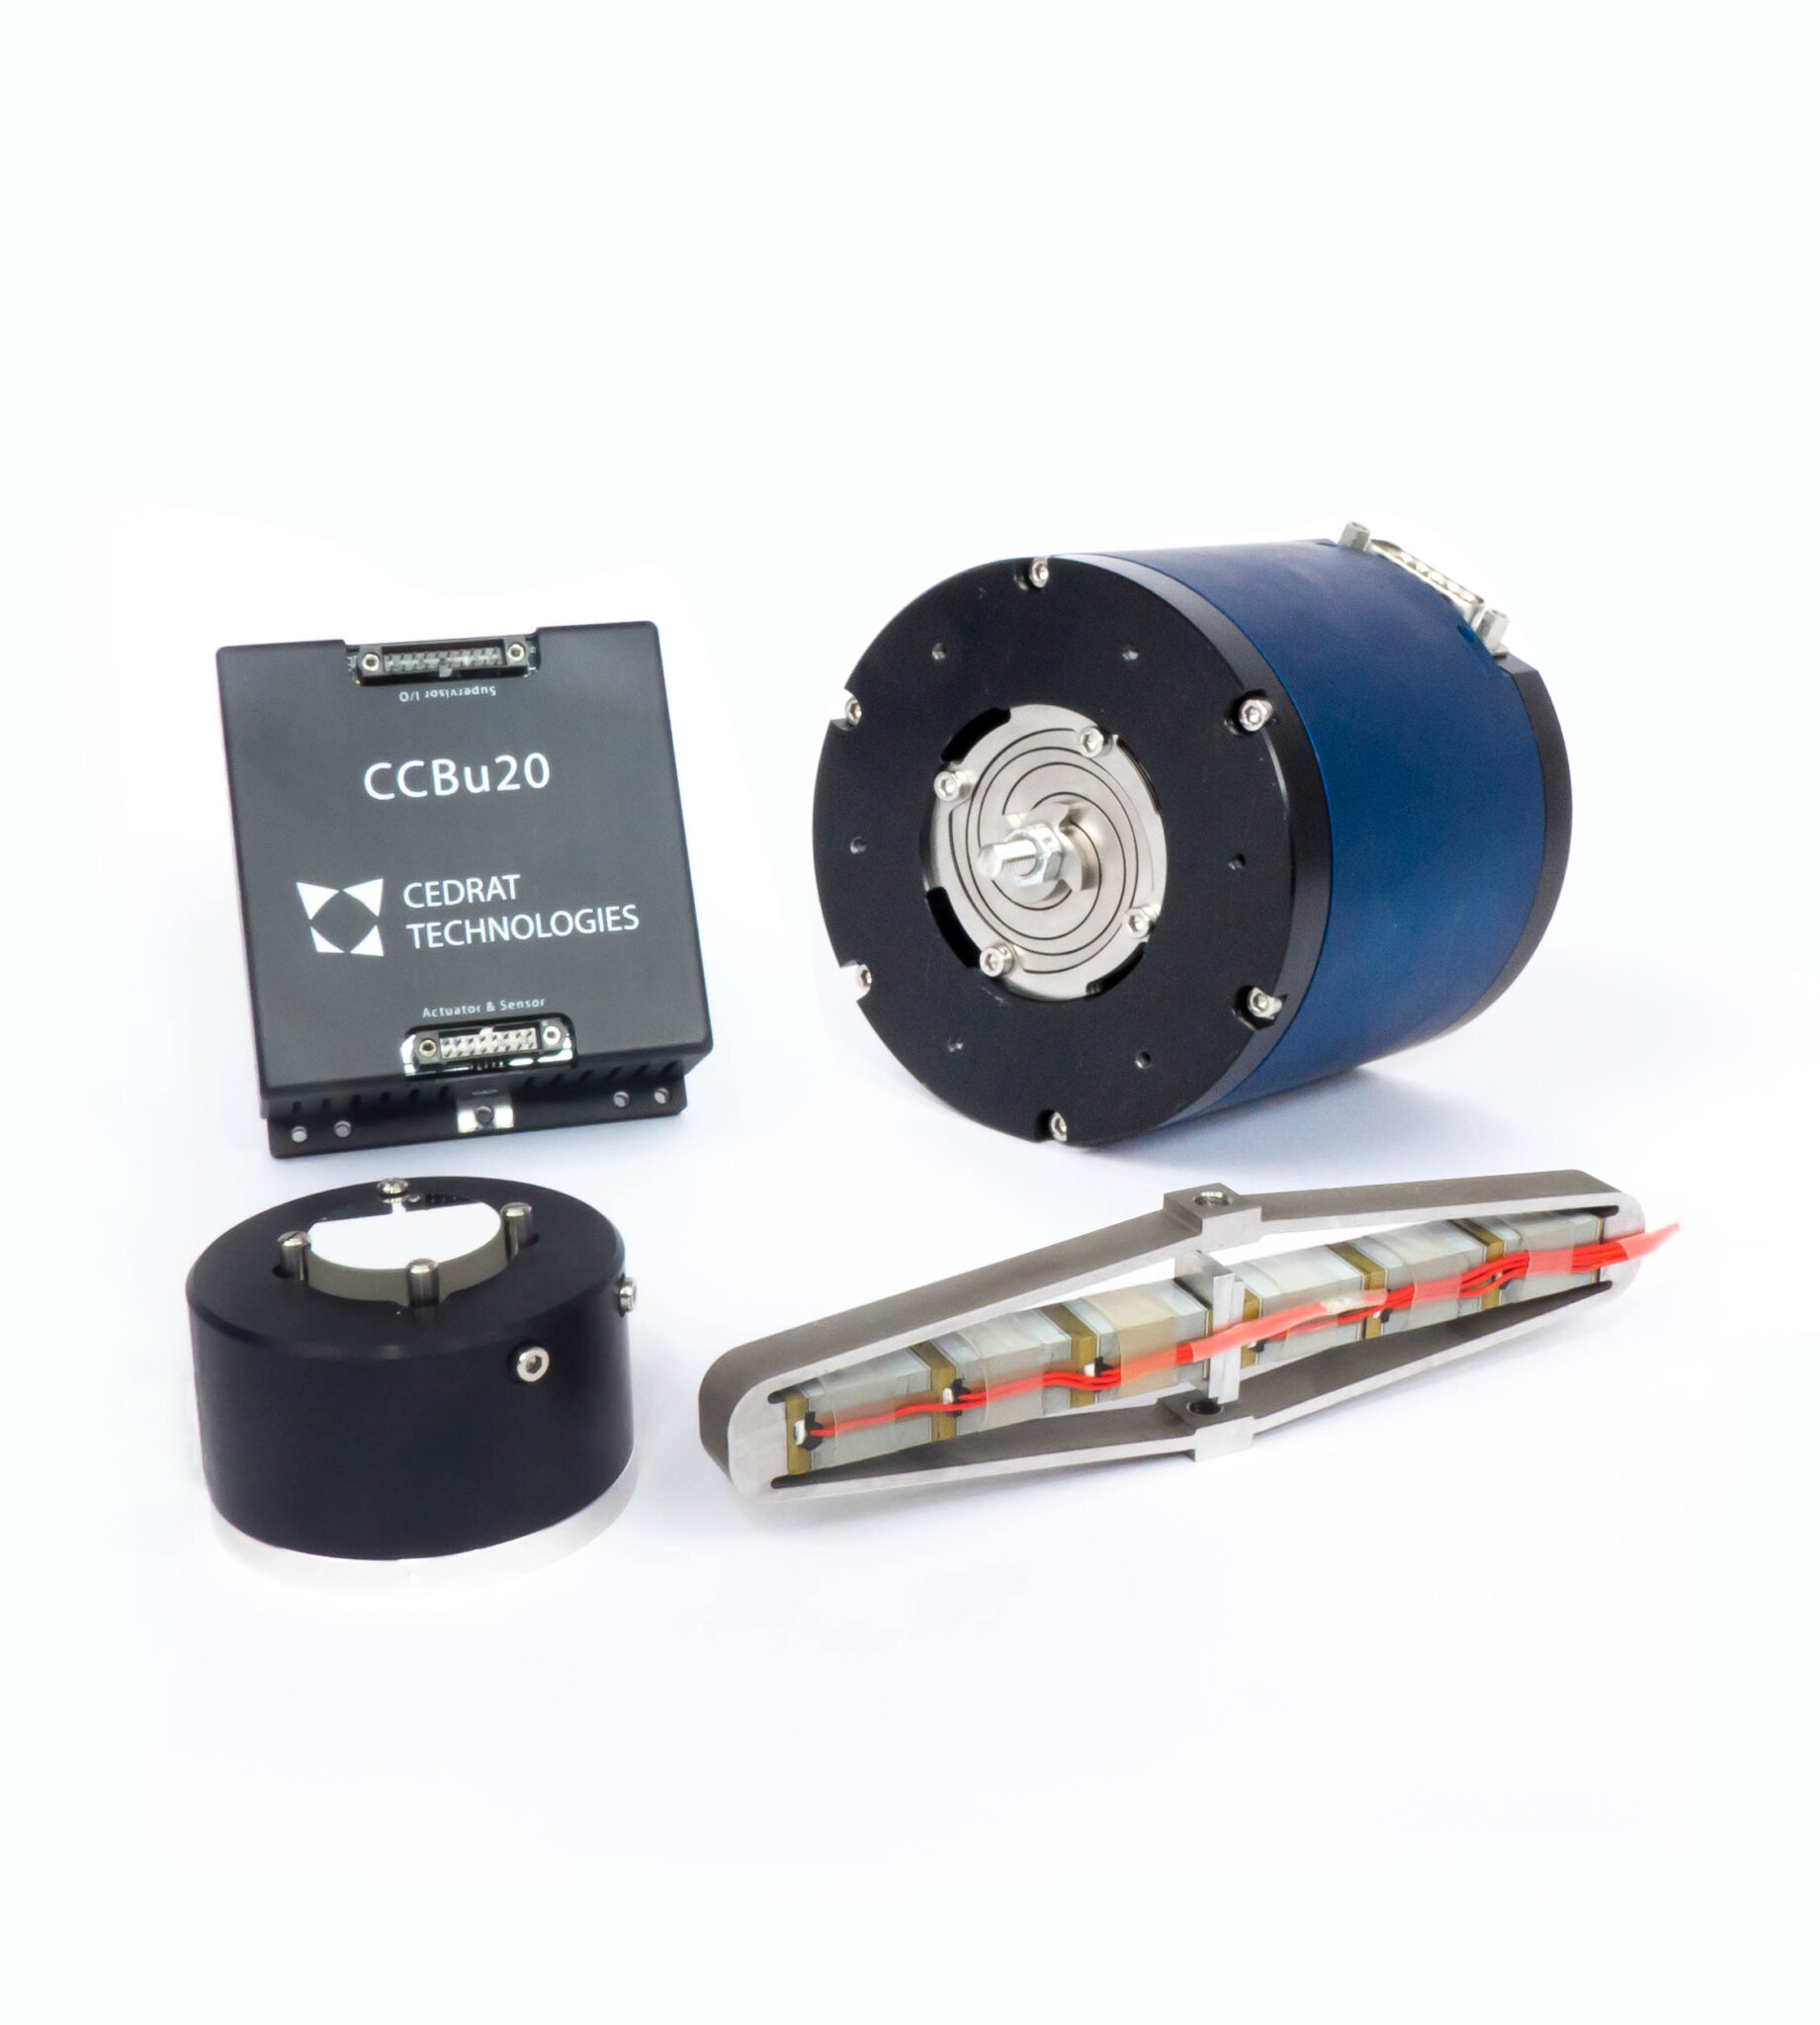 A picture showing diferent actuators, mechanisms and electronics from CEDRAT TECHNOLOGIES